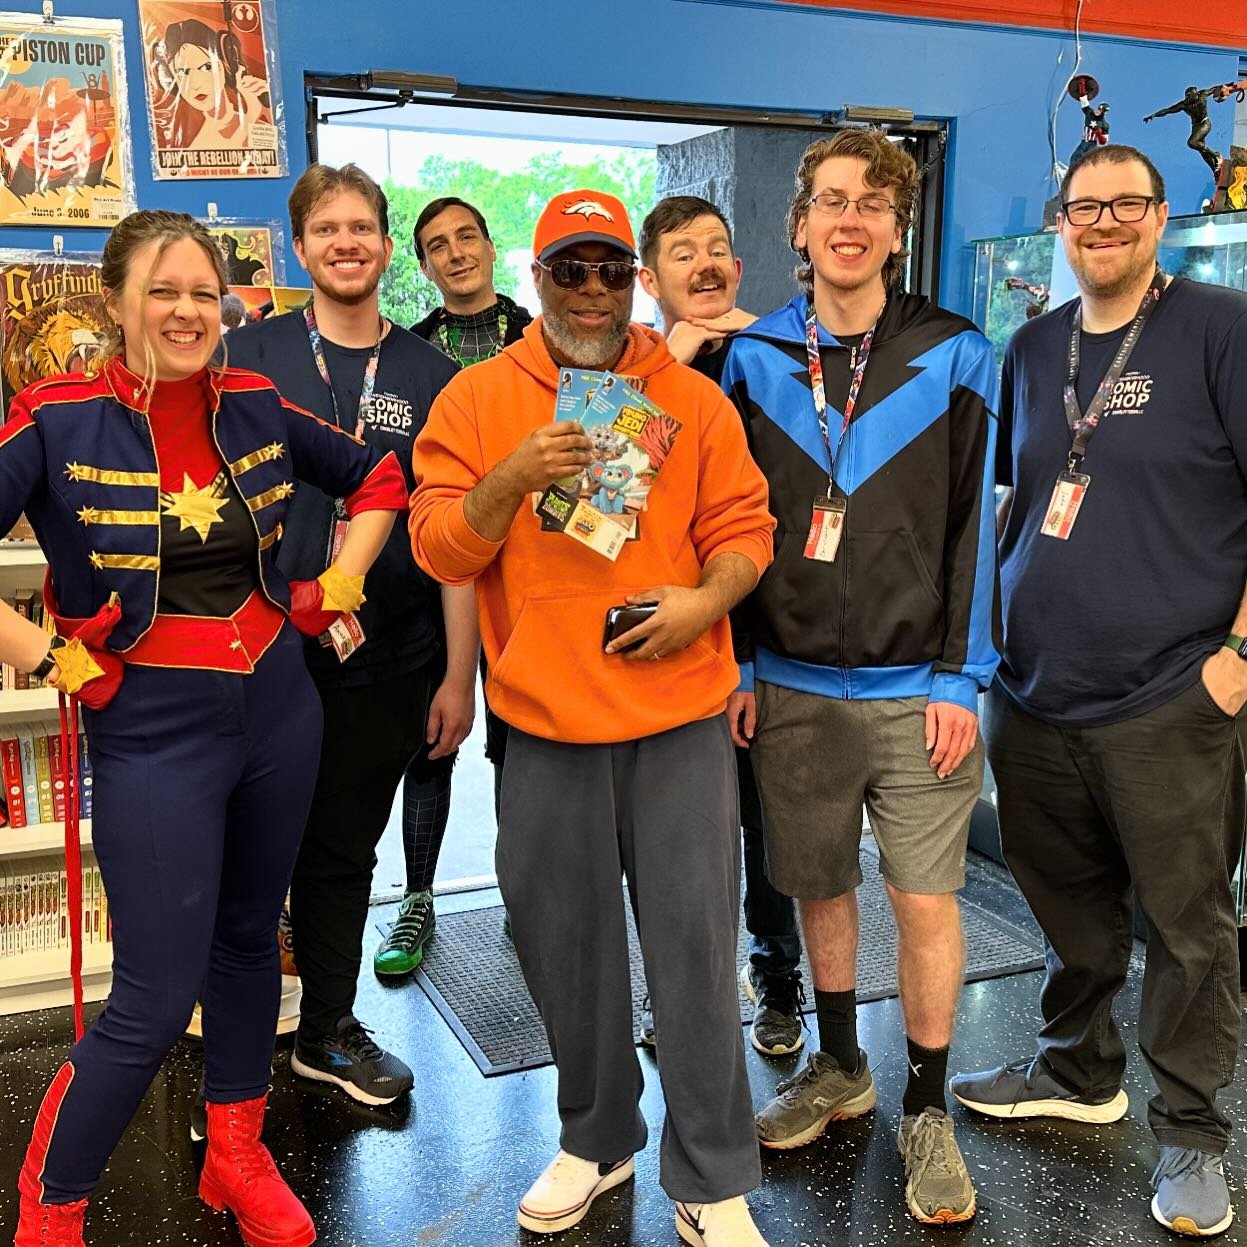 What a great Free Comic Book Day! We were all too busy to take pictures (and we had professional videographers in the shop for Reasons), but had to say yes when our friend Gary asked us for a pic! Unfortunately Kate had already left to pick up the ki